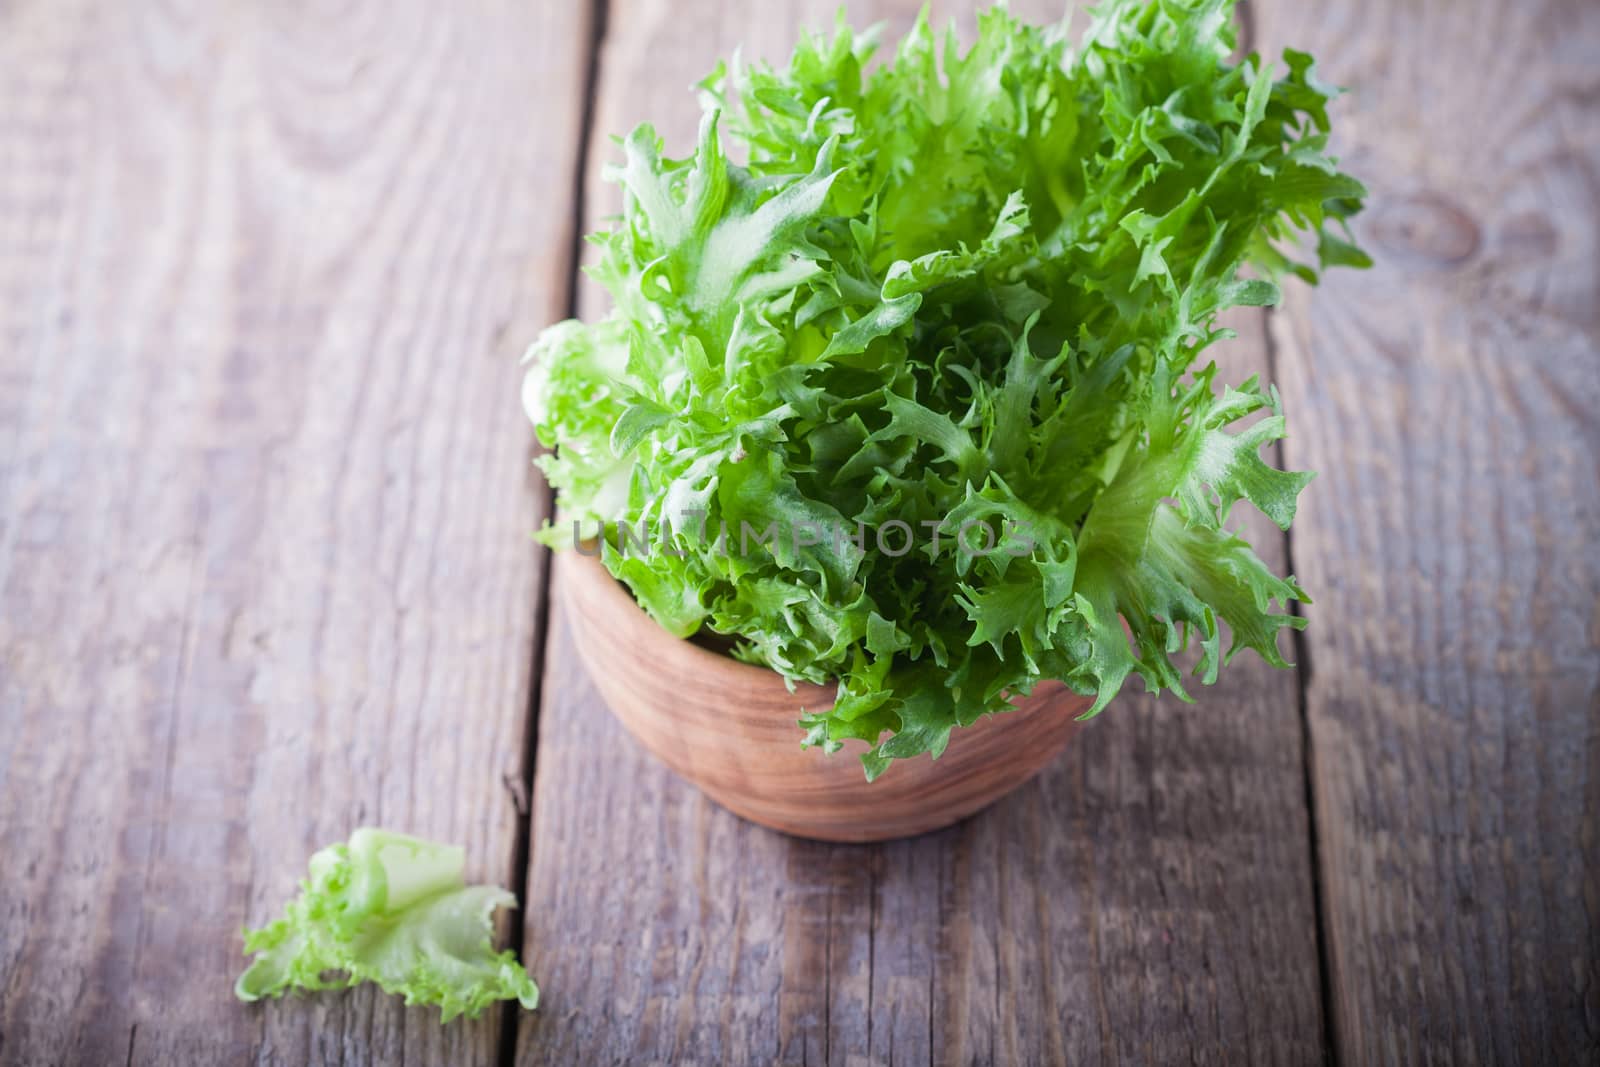 Fresh green lettuce on a wooden table.